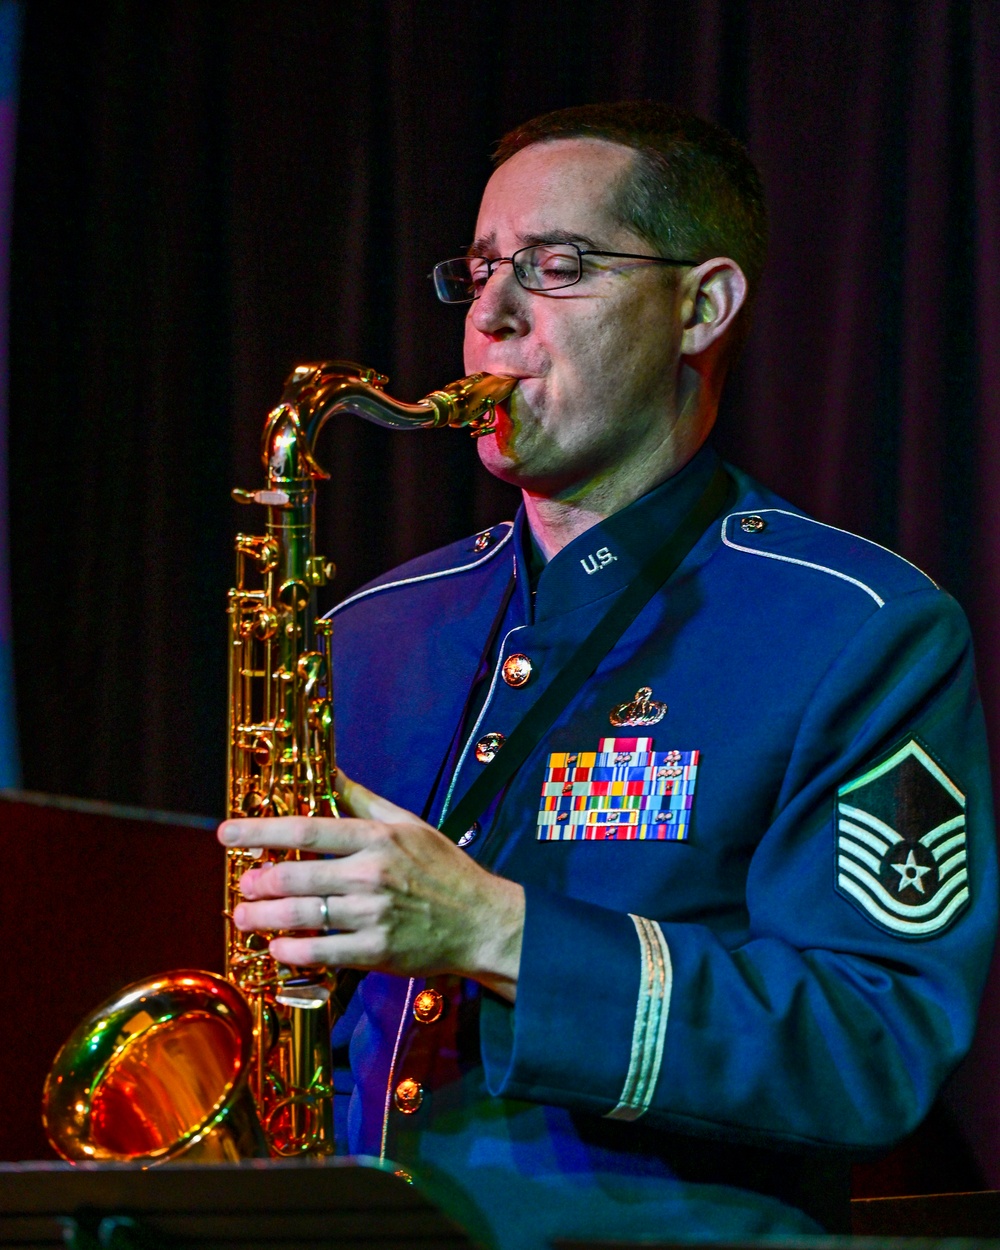 United States Air Force Band of Flight